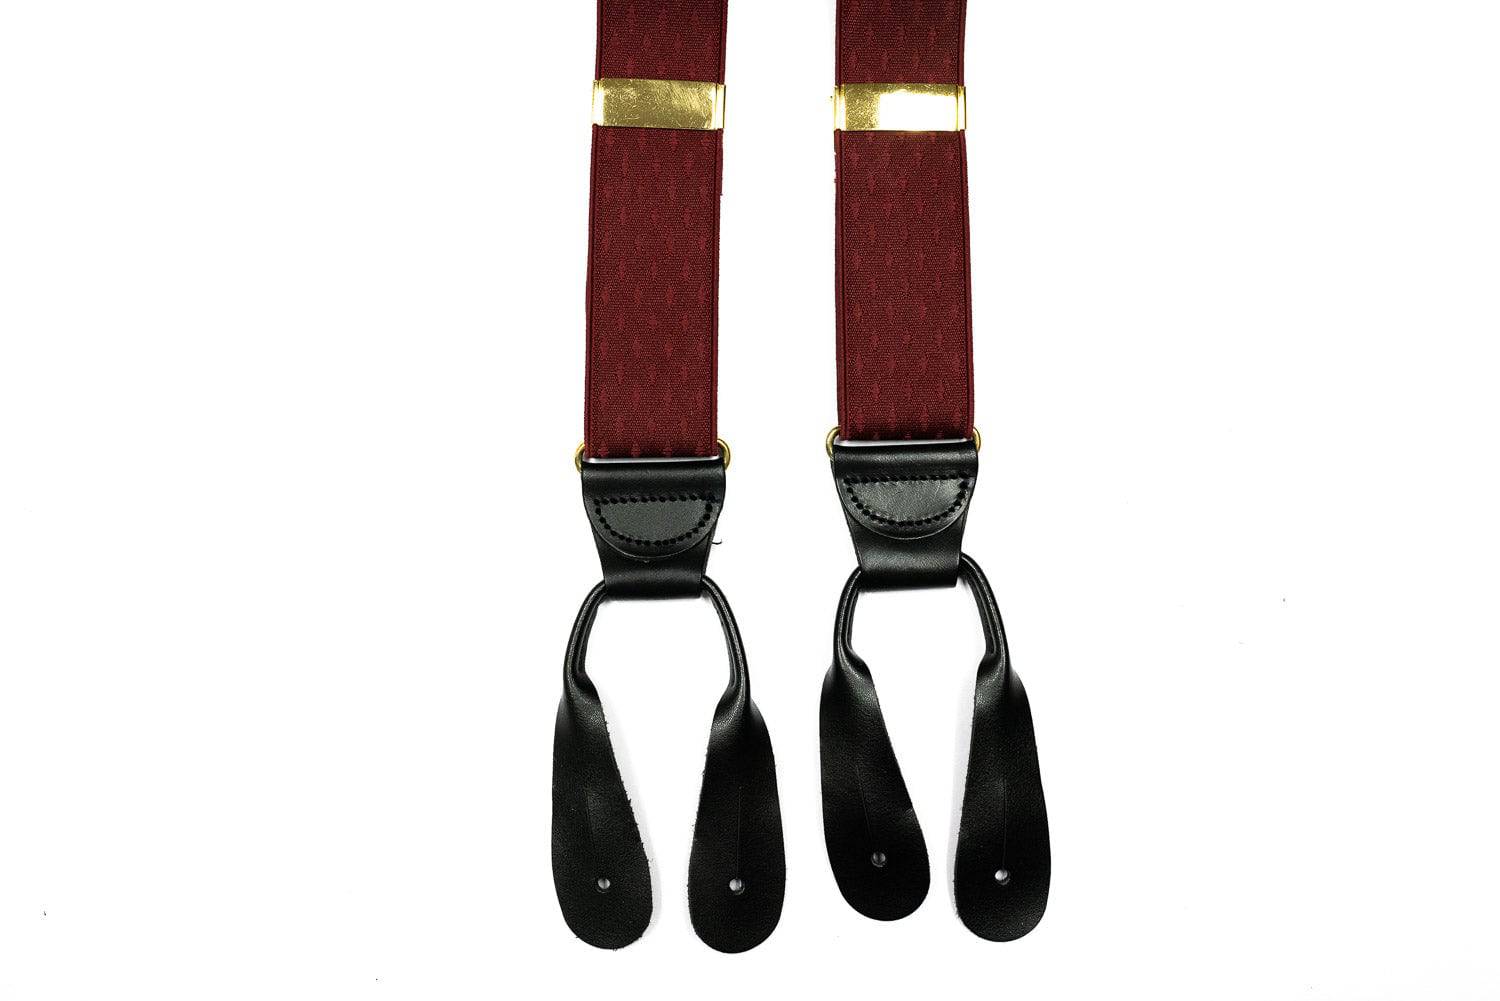 Burgundy Diamond Texture Button In Leather Tab Braces Suspenders - Rainwater's Men's Clothing and Tuxedo Rental